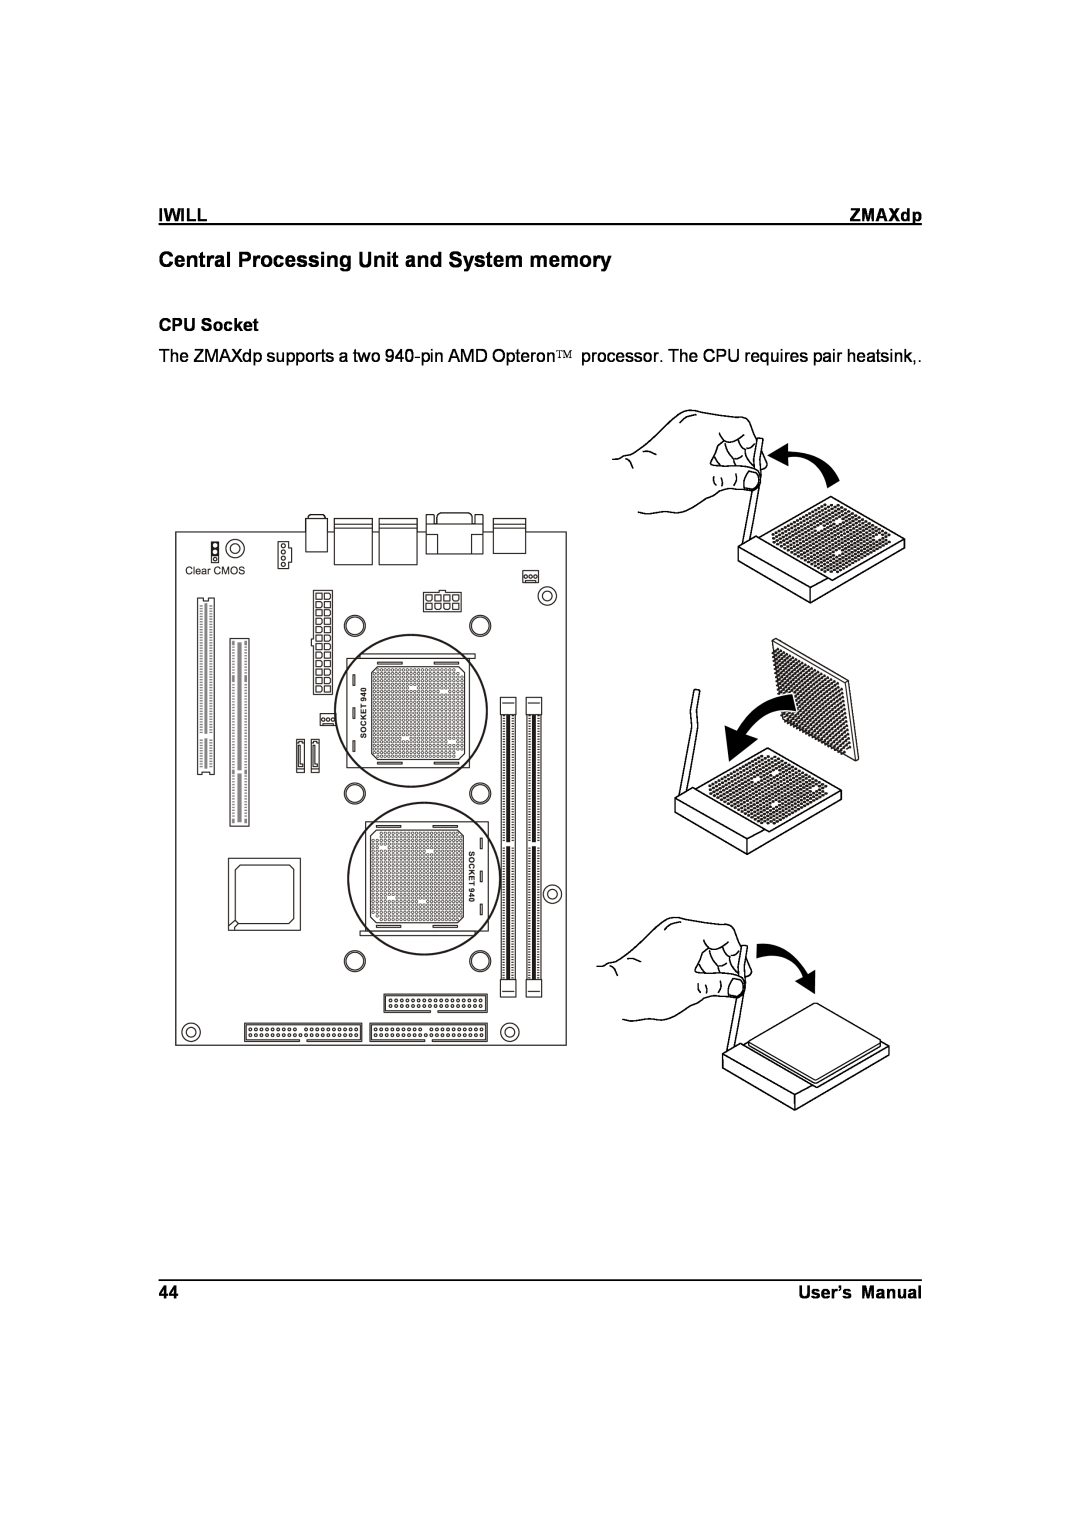 IBM ZMAXdp user manual Central Processing Unit and System memory, Iwill, CPU Socket, User’s Manual 